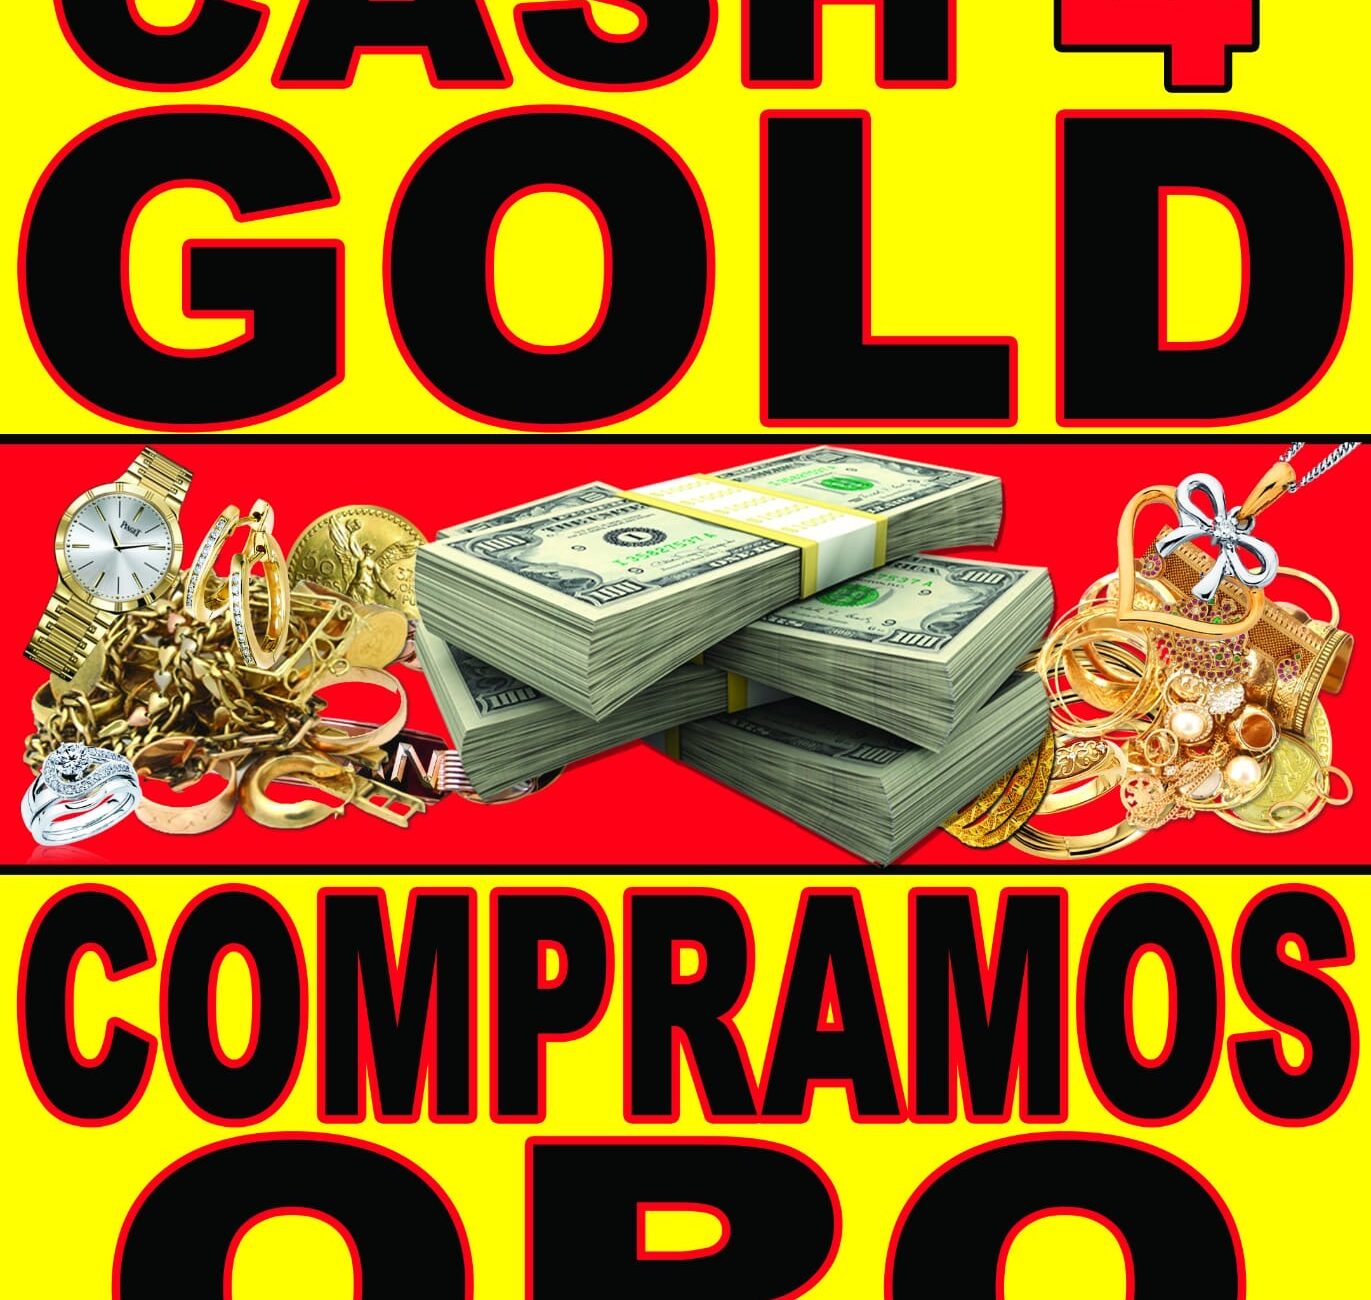 Gold, Jewelry & Diamond Dealers - Los Angeles Gold Buyers